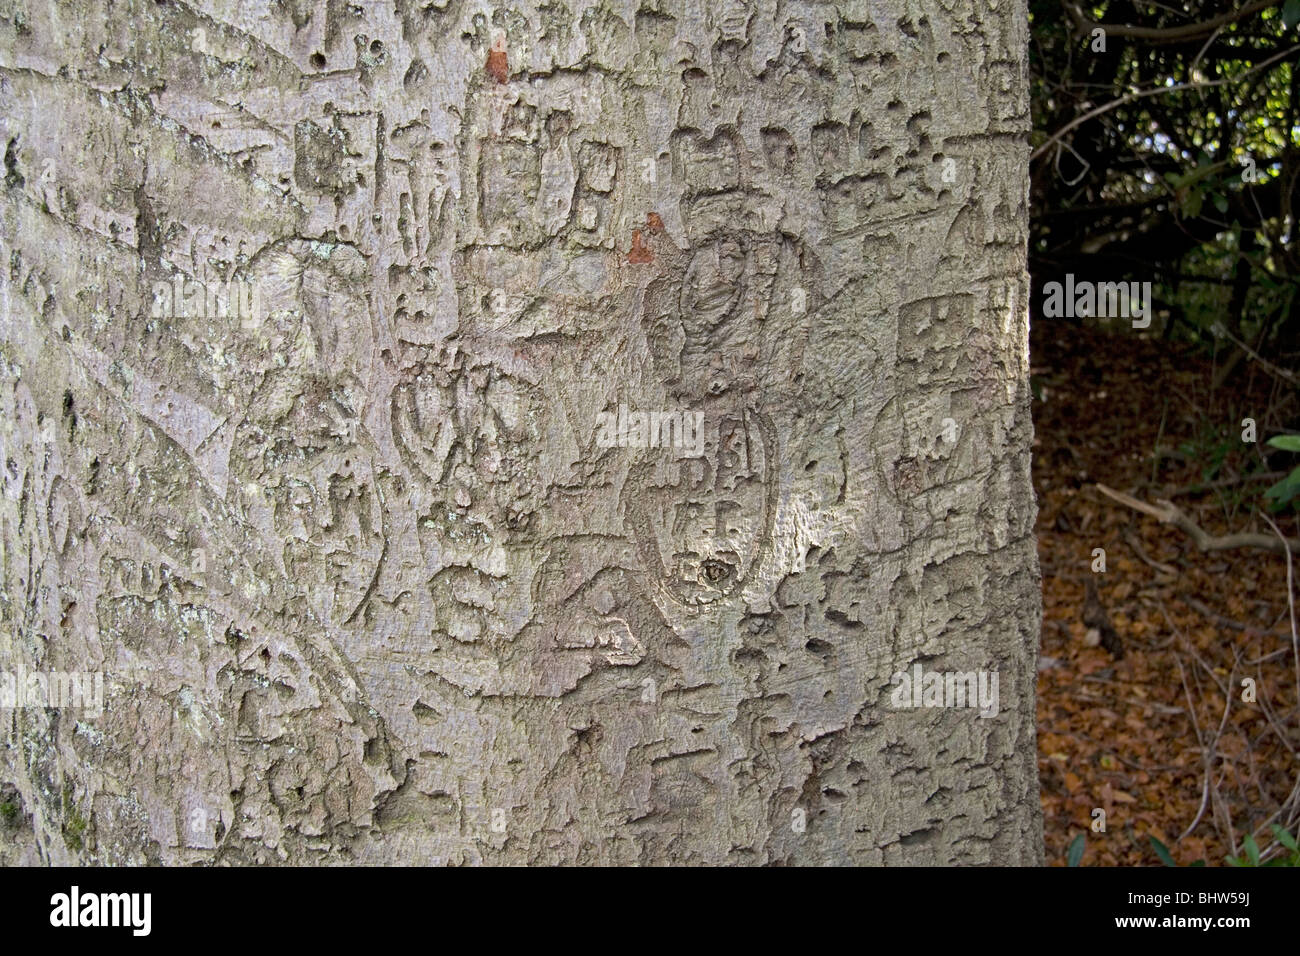 Initials carved in a tree trunk, Virginia Water, England. Stock Photo